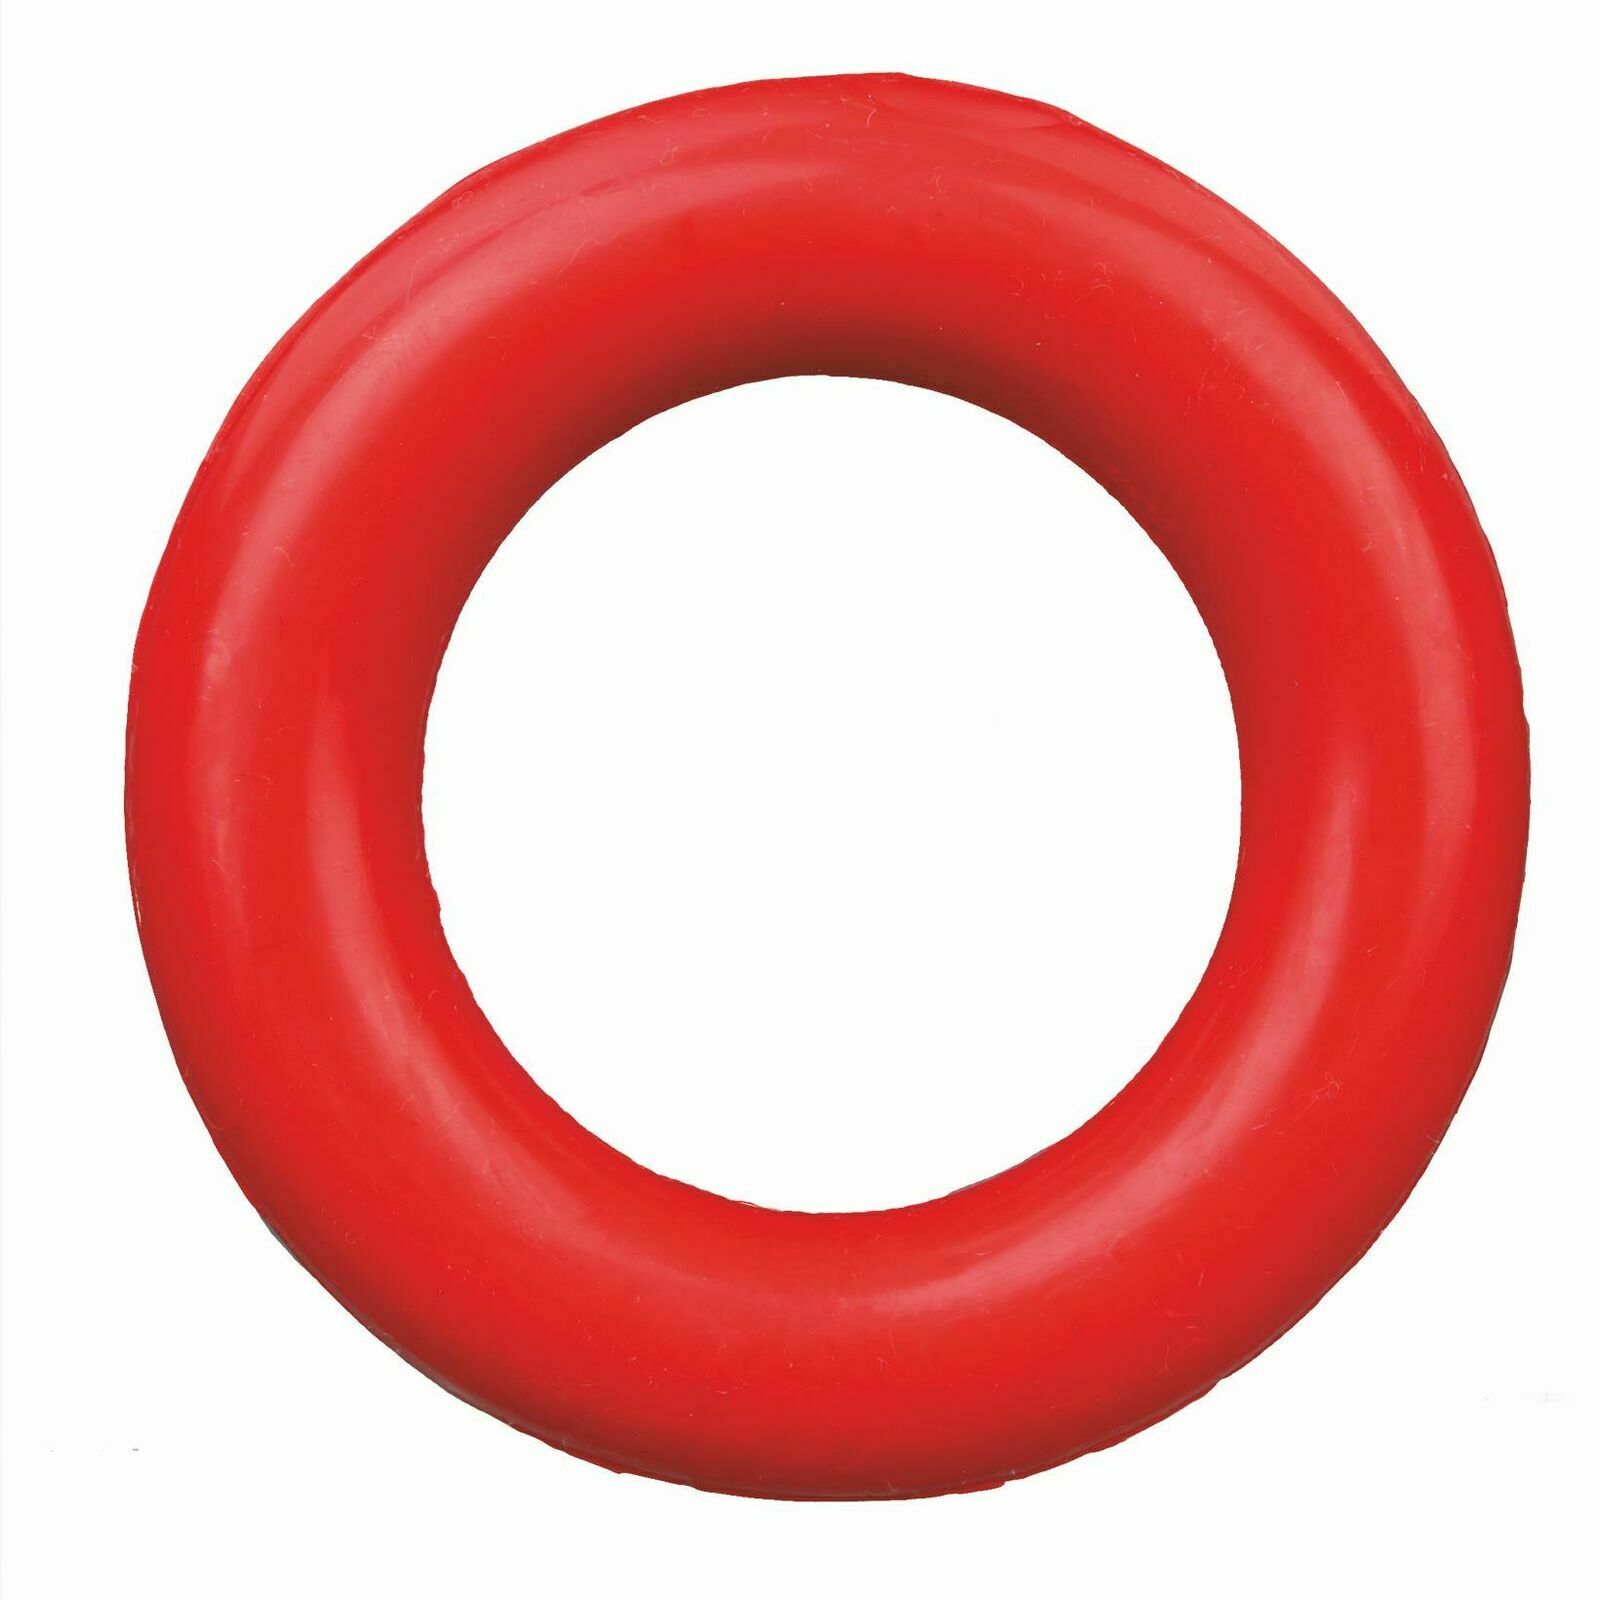 Rubber Chew Ring